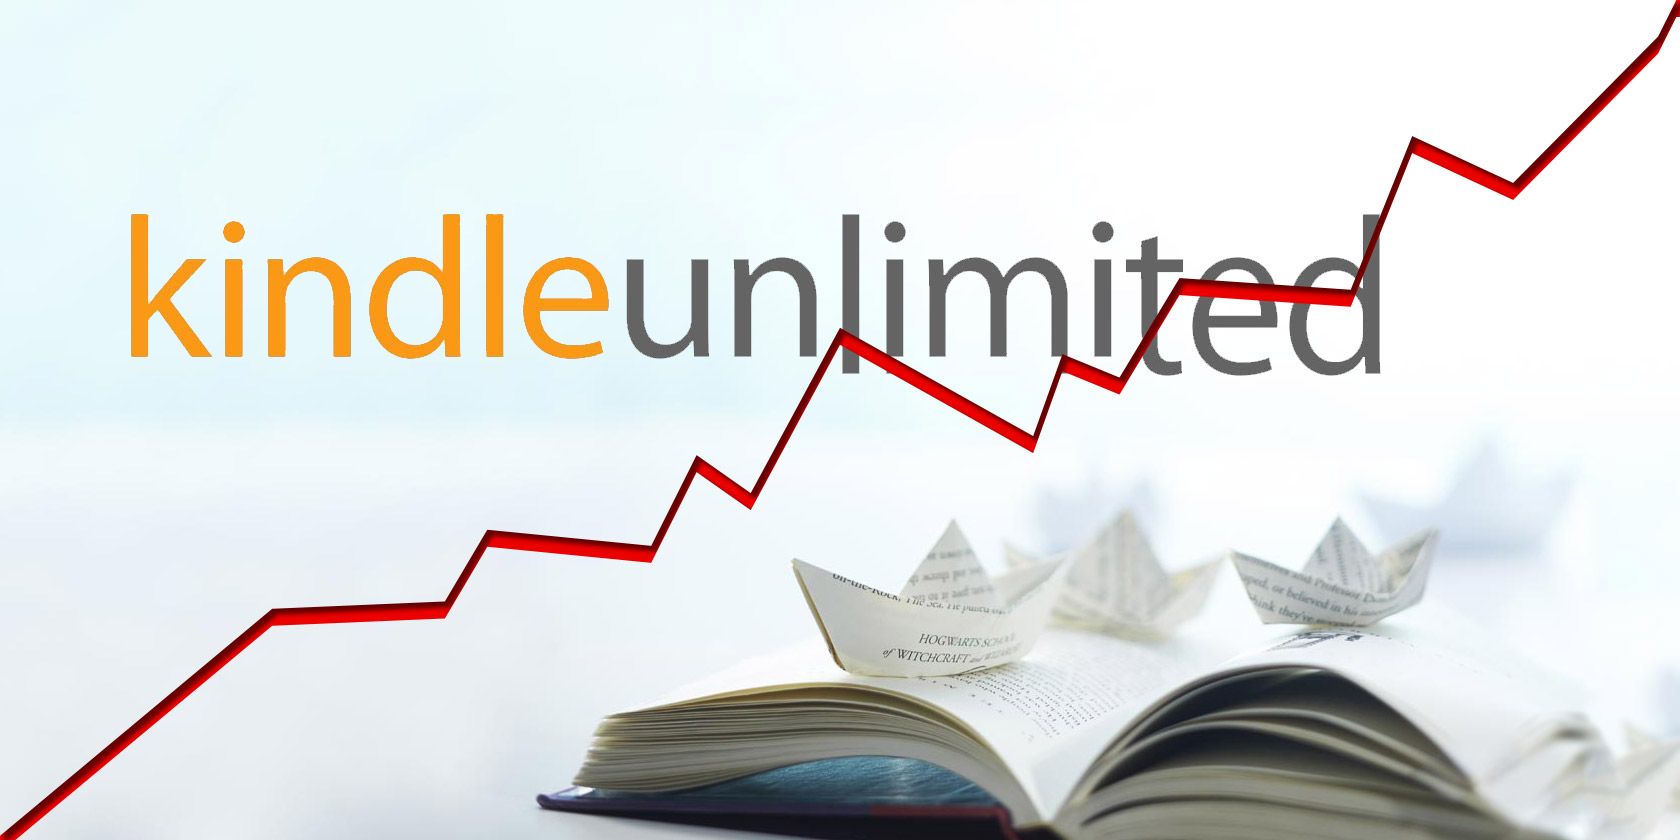 5 Reasons Why a Kindle Unlimited Subscription Isn't Worth It